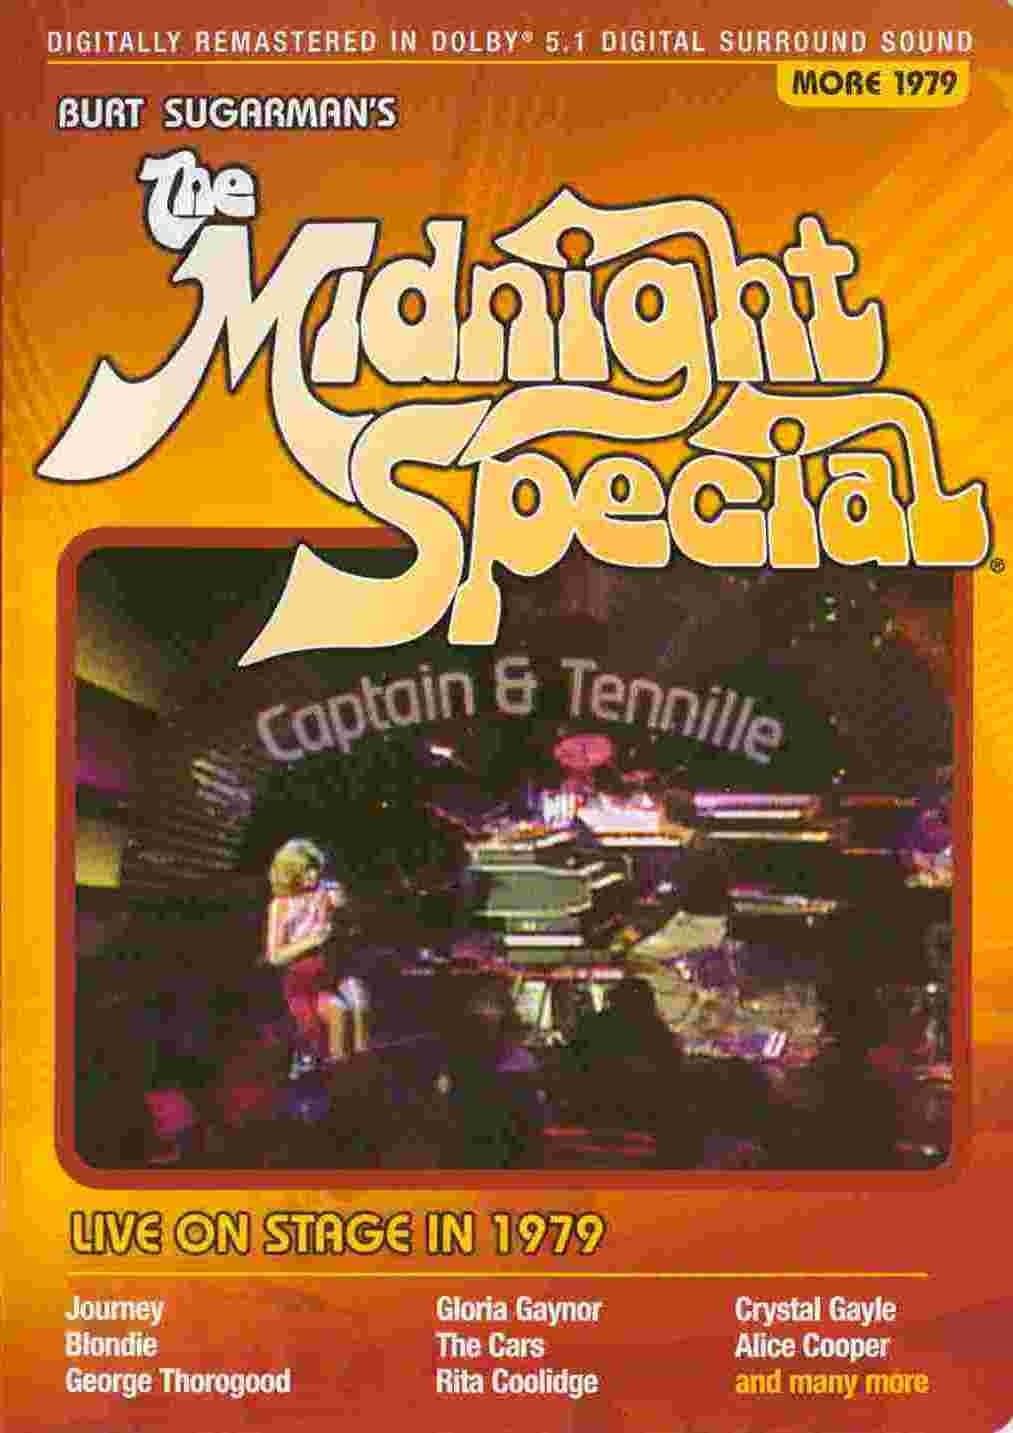 The Midnight Special Legendary Performances: More 1979